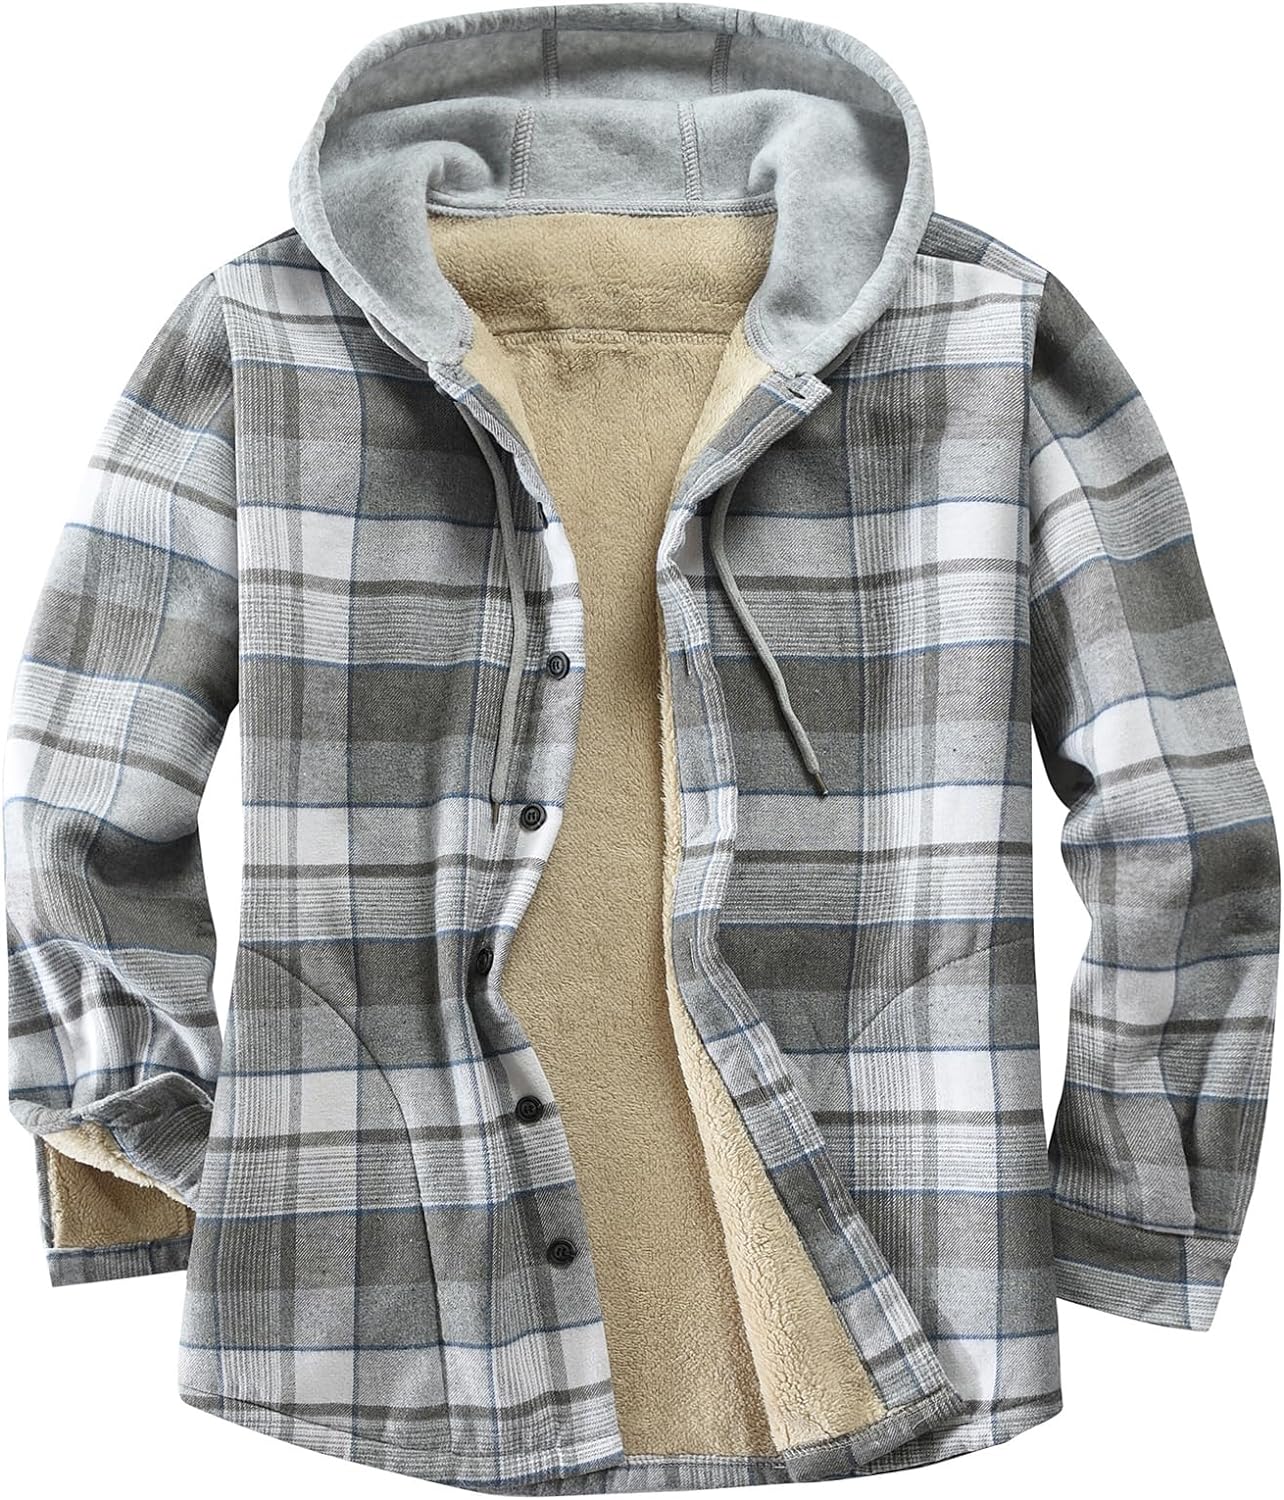 Derbars Men's Cotton Plaid Shirts Jacket Fleece Lined Flannel Shirts Sherpa  Button Down Jackets with Hood for Men